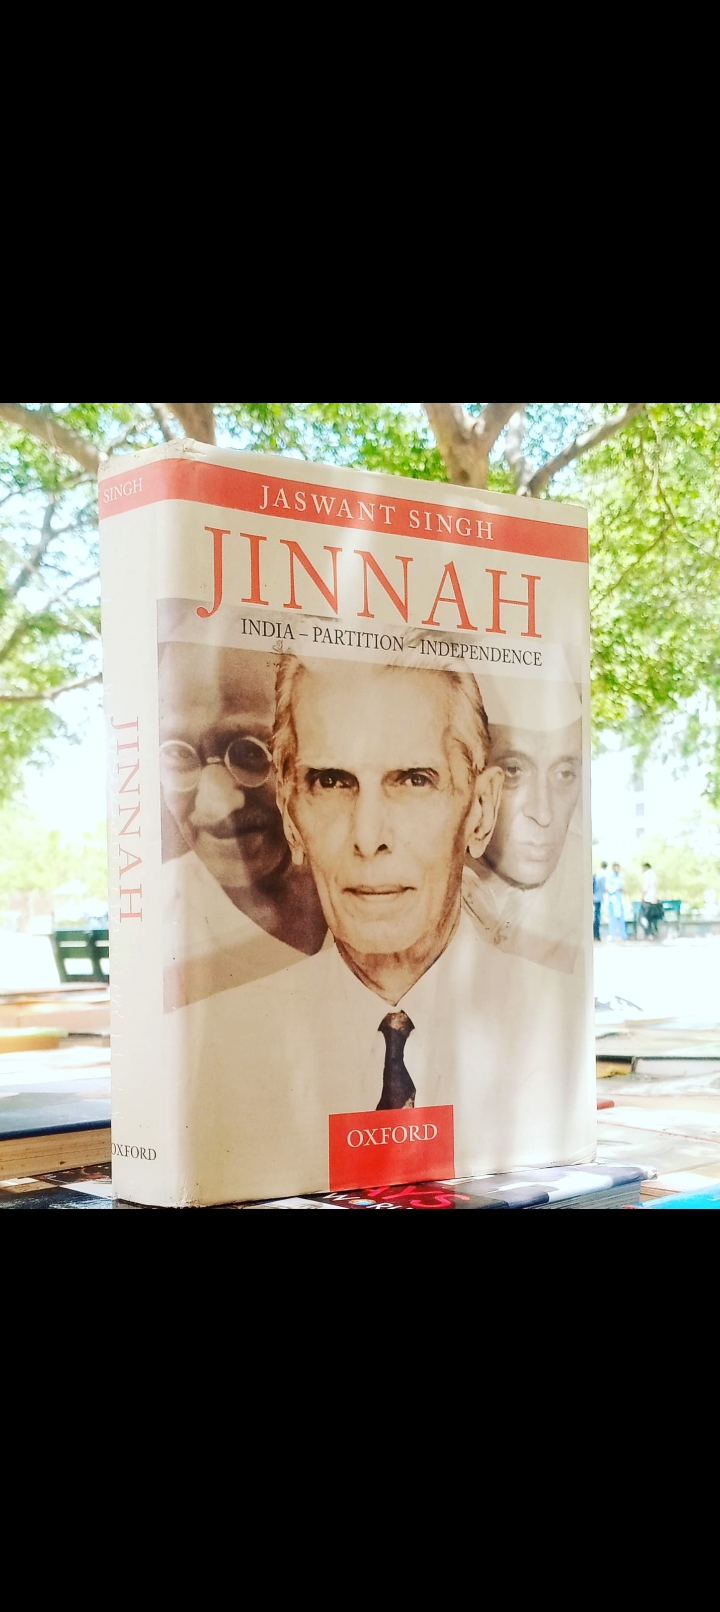 jinnah india-partition-independence by jaswant singh. original hardcover